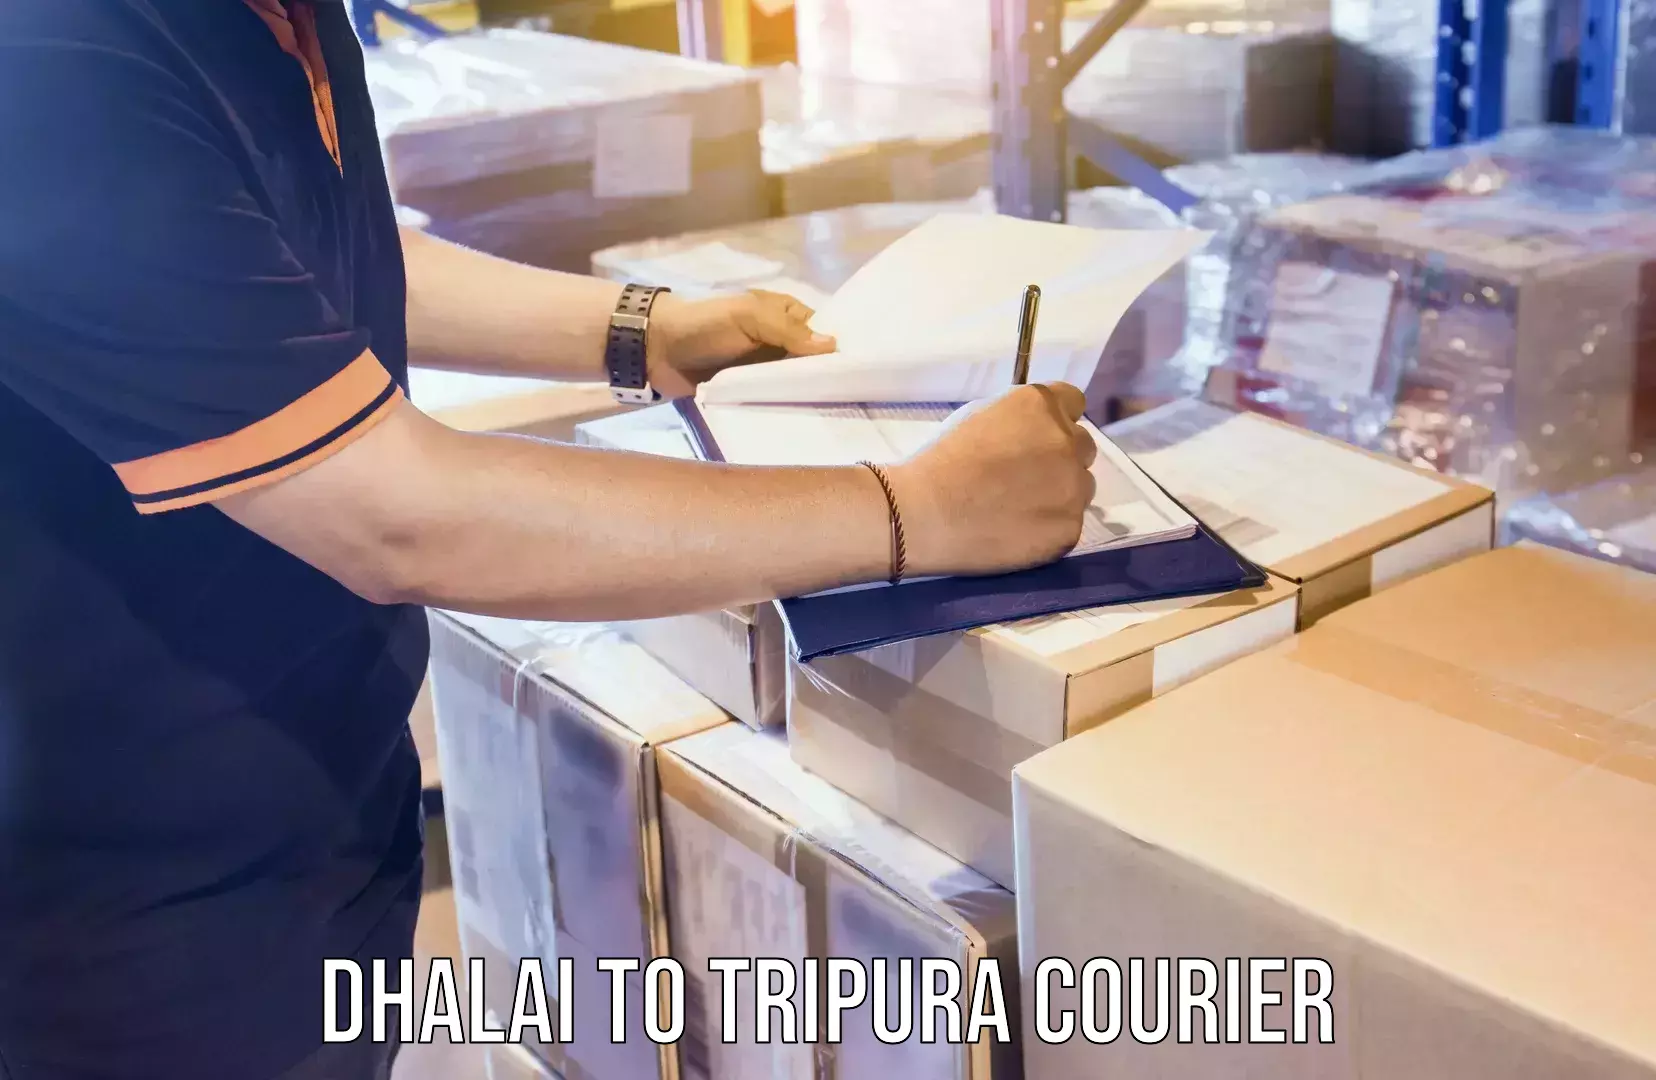 State-of-the-art courier technology Dhalai to Tripura